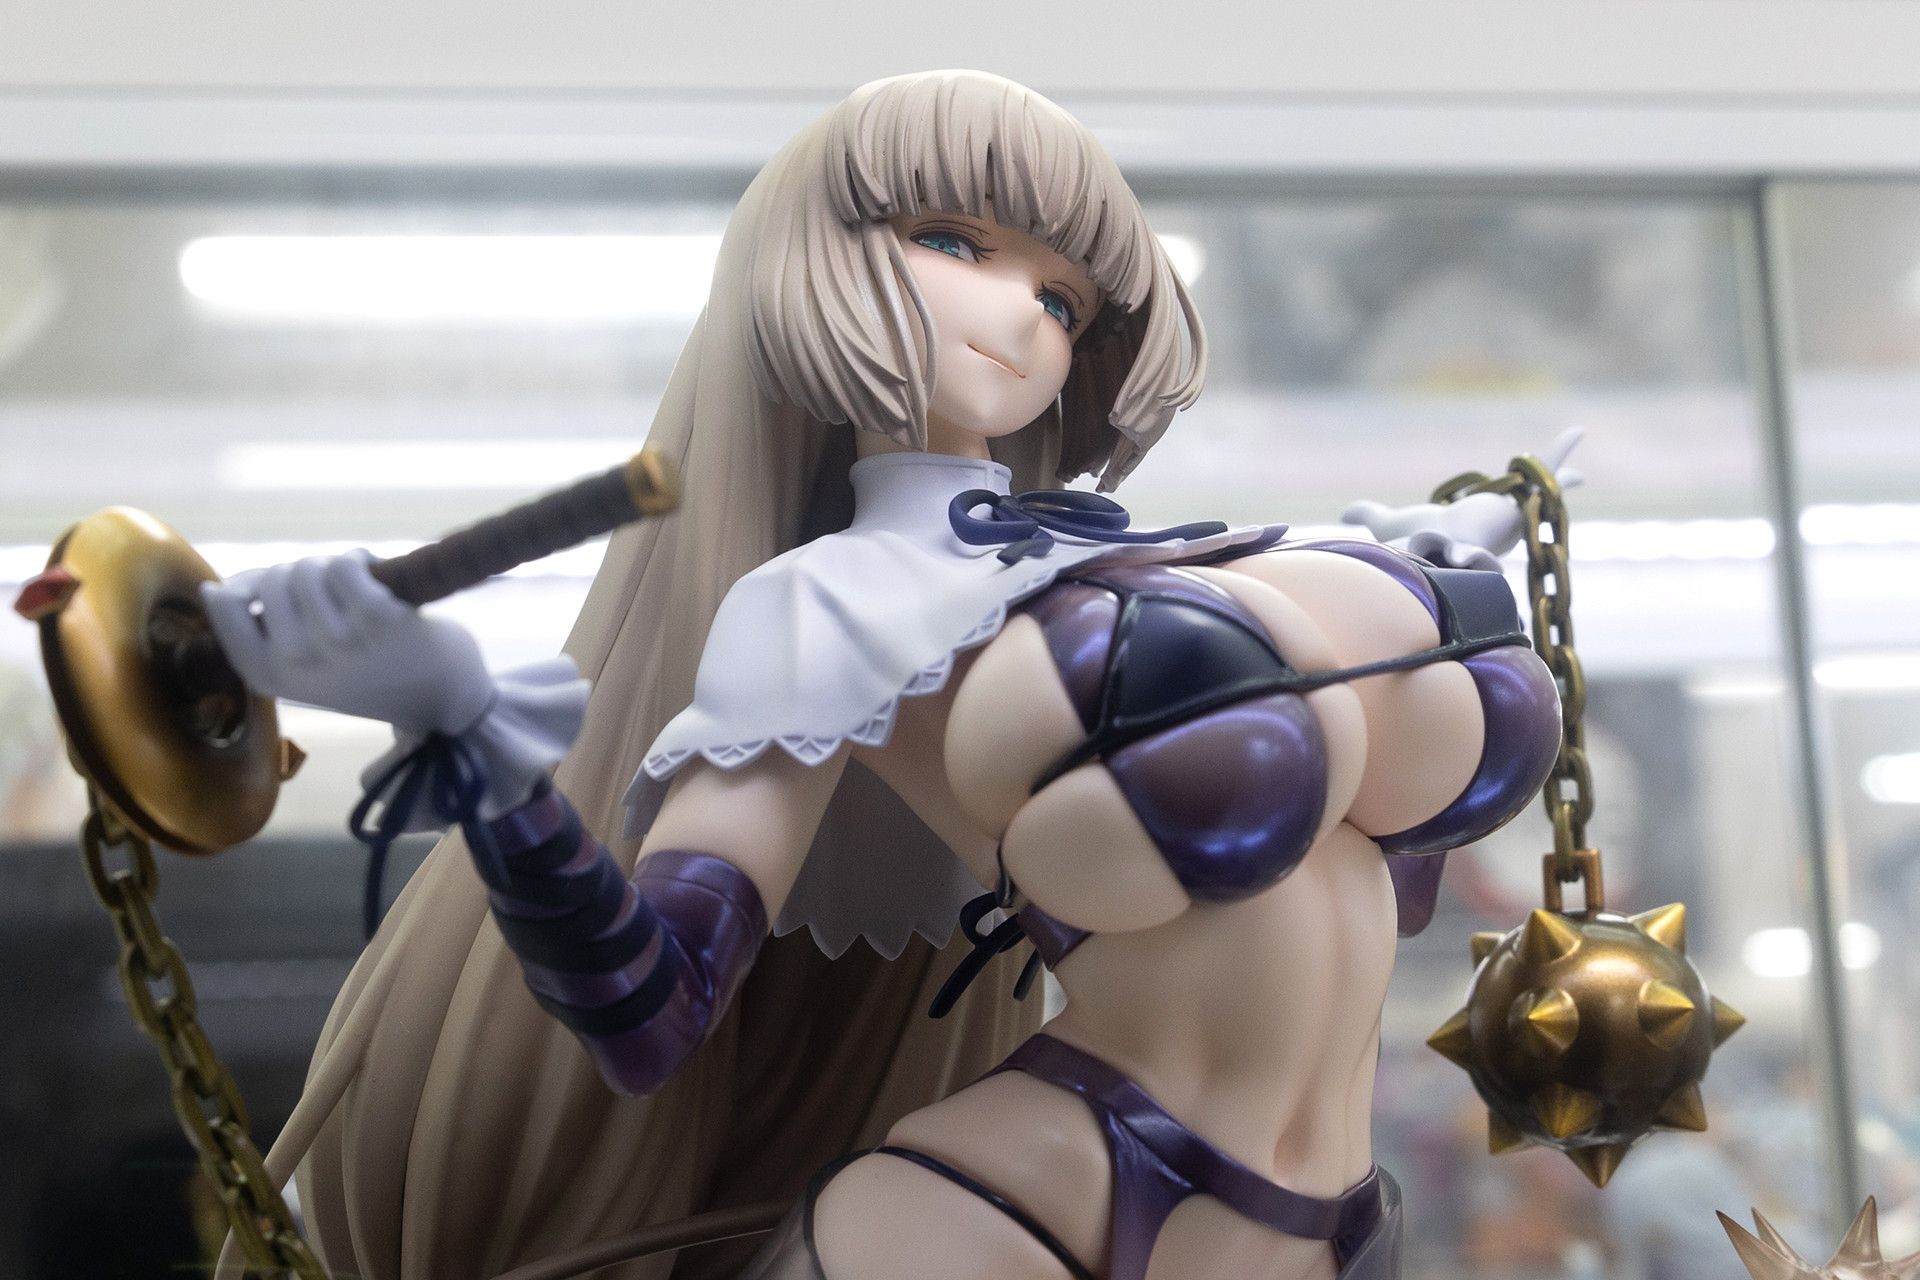 【Image】Bomber Girl's new female gaki figure, fleshed out is too real and etched 3